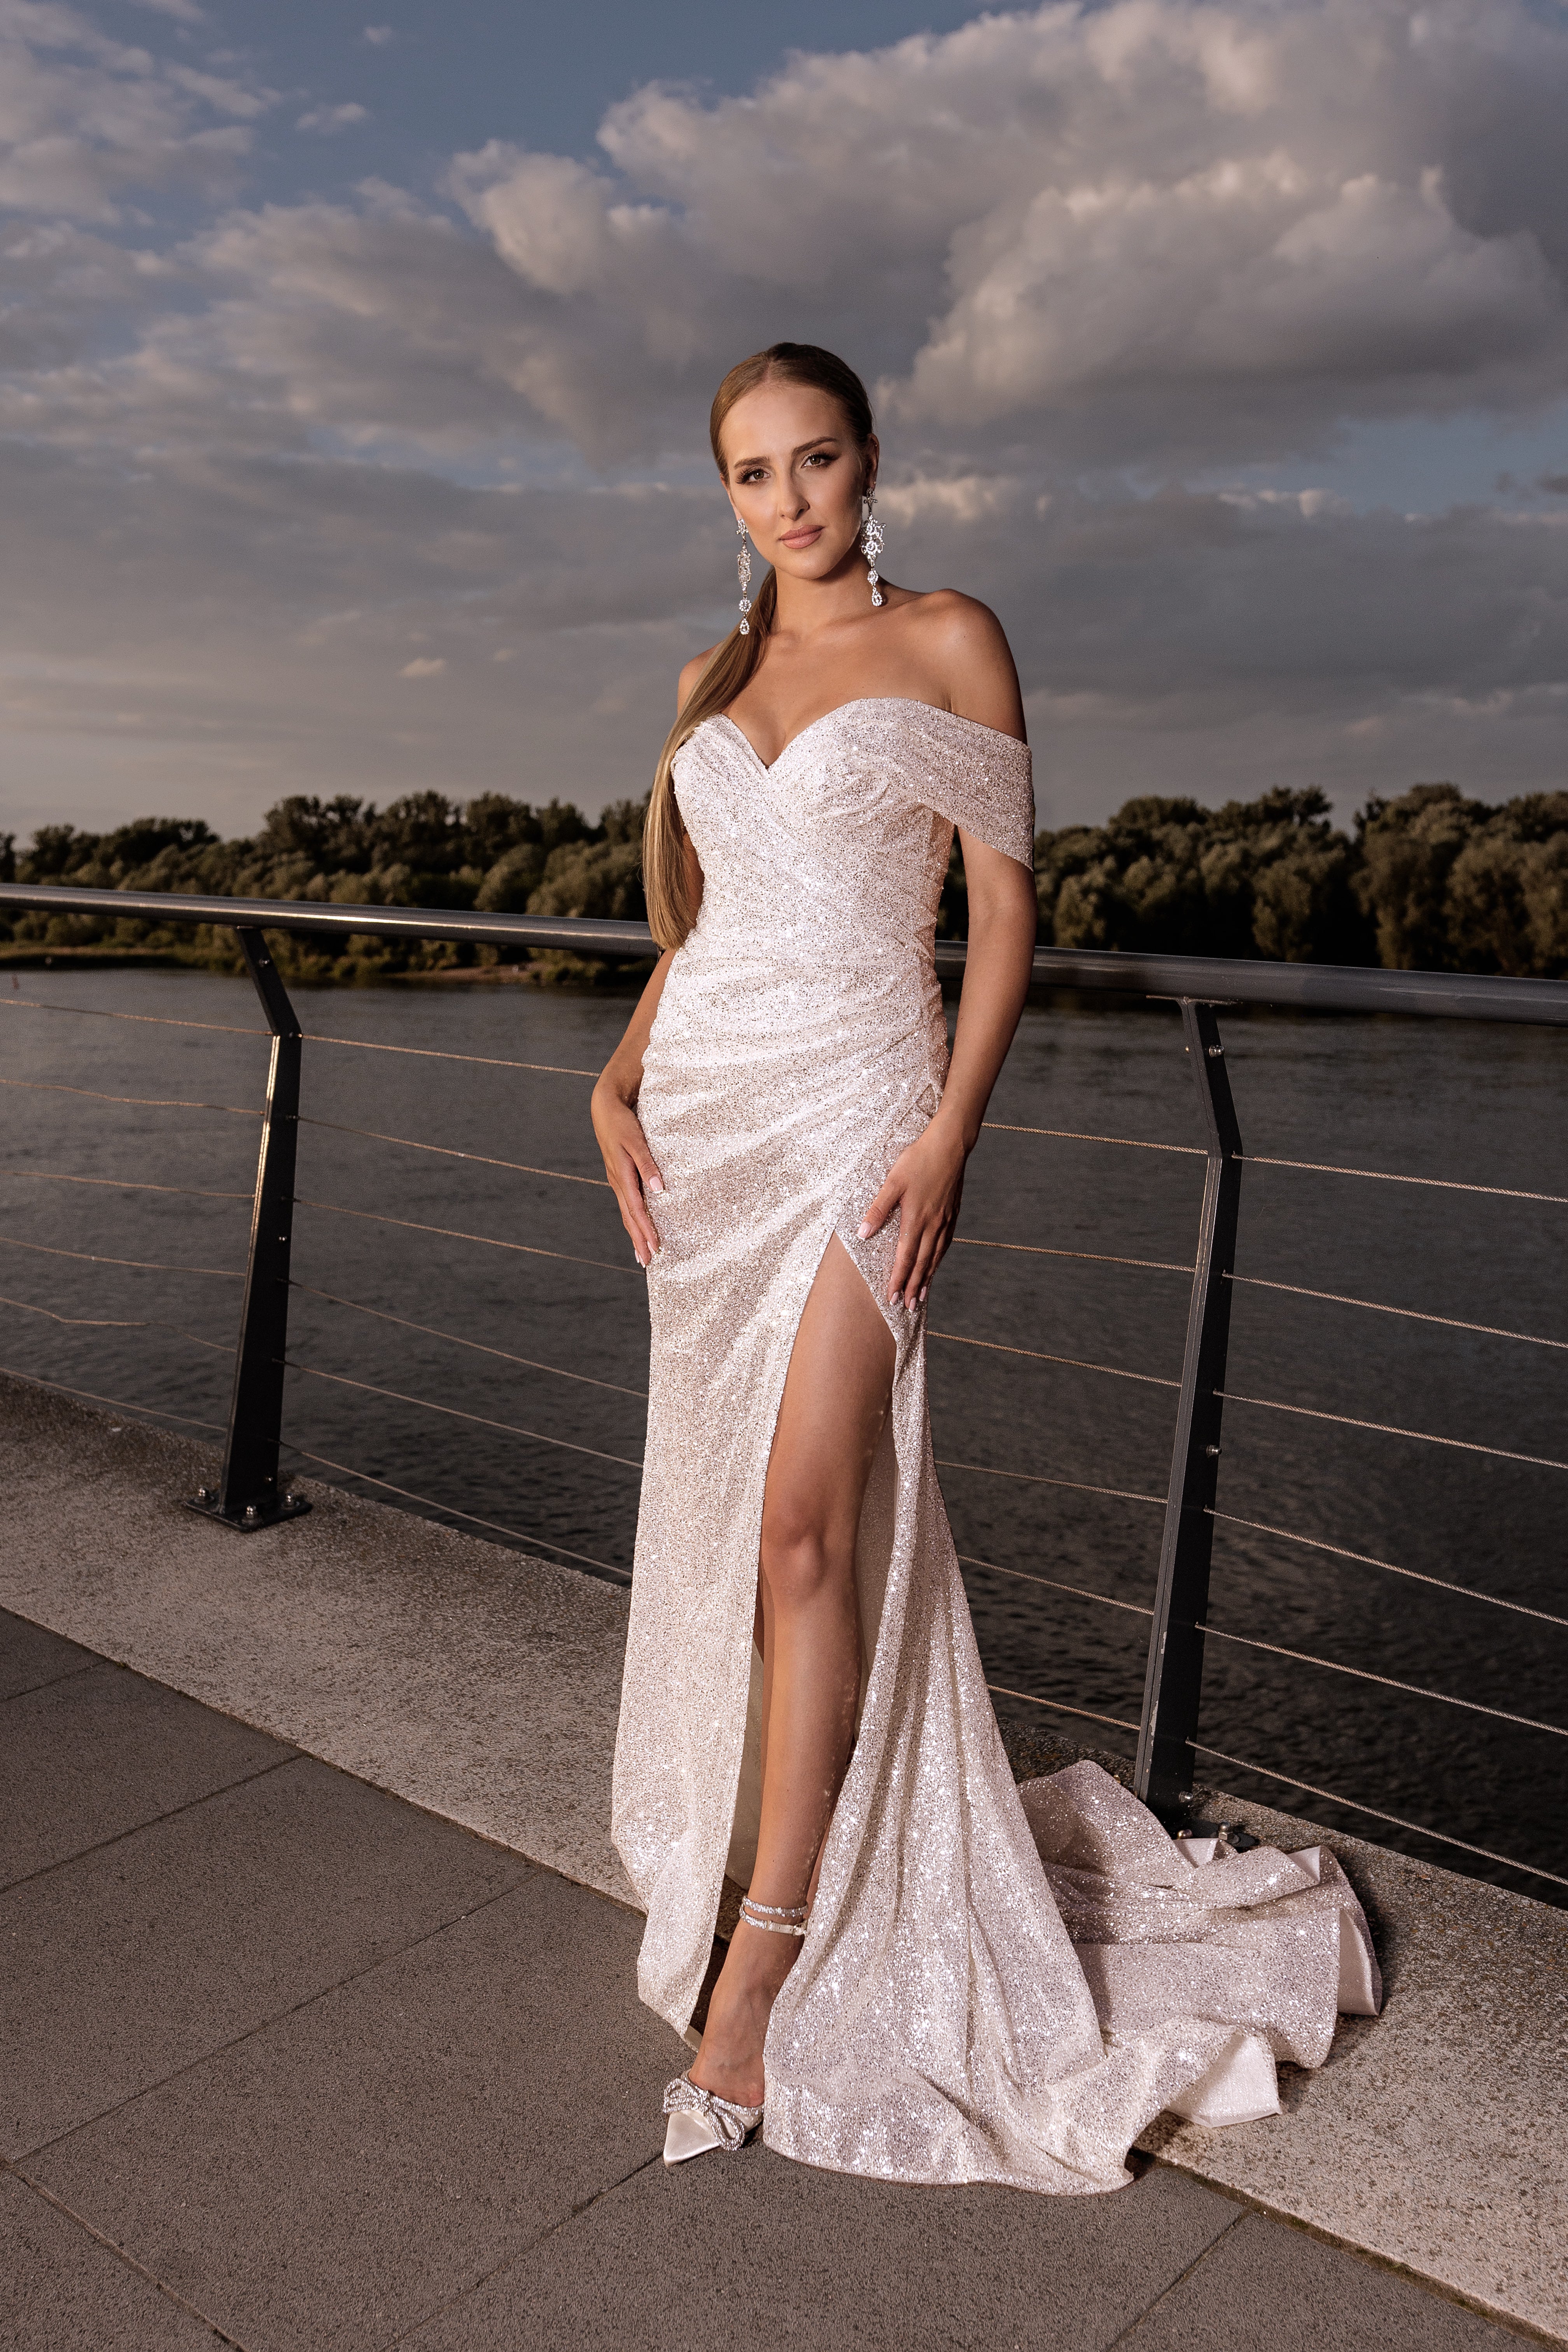 Polly - Sparkling Sheath Wedding Dress with Off the Shoulder Sleeves - Maxima Bridal